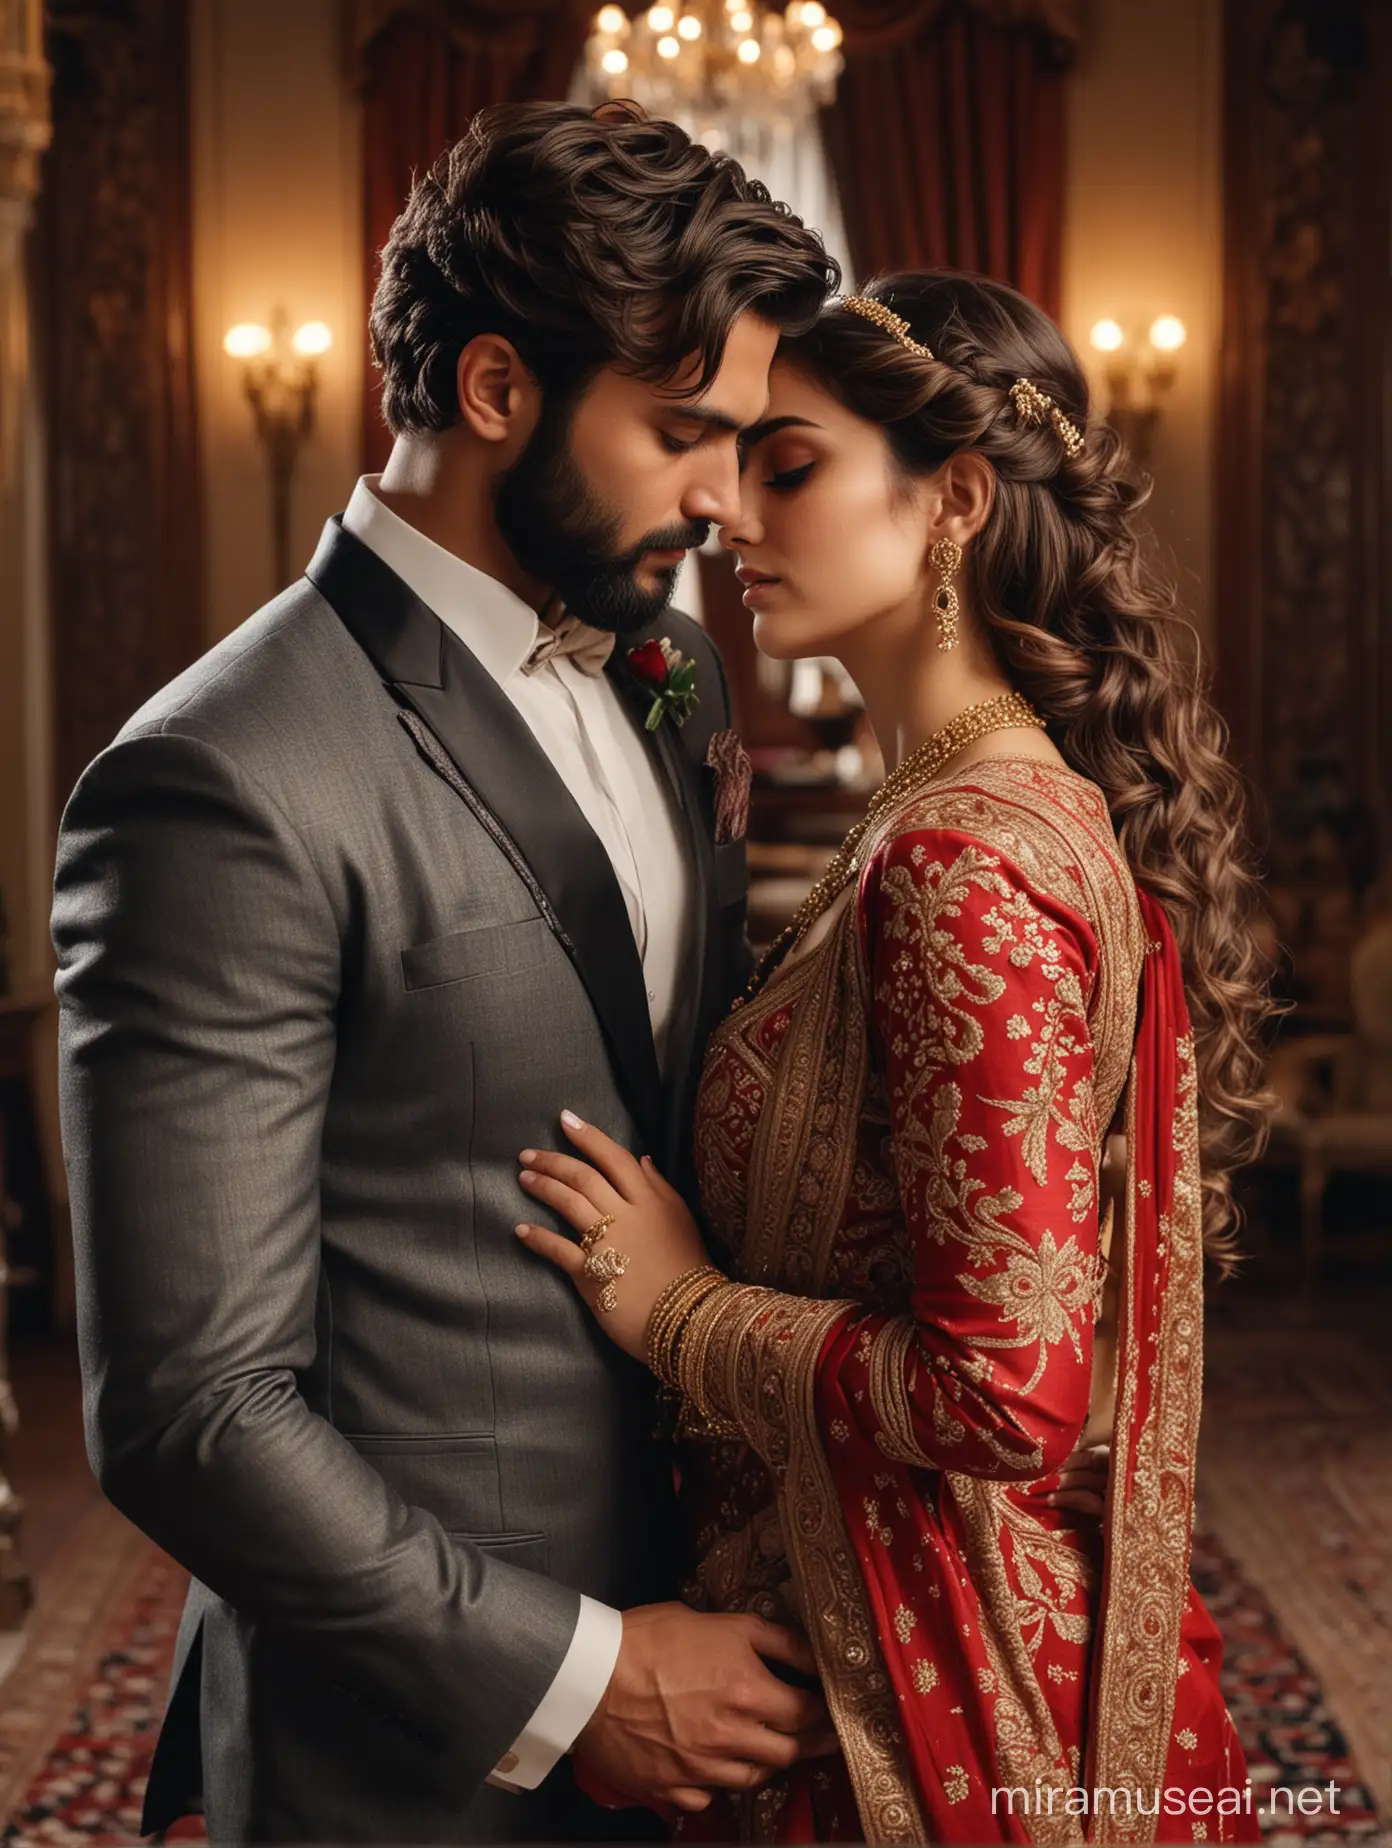 Embracing Love Beautiful Fusion of European and Indian Couple in Romantic Palace Setting